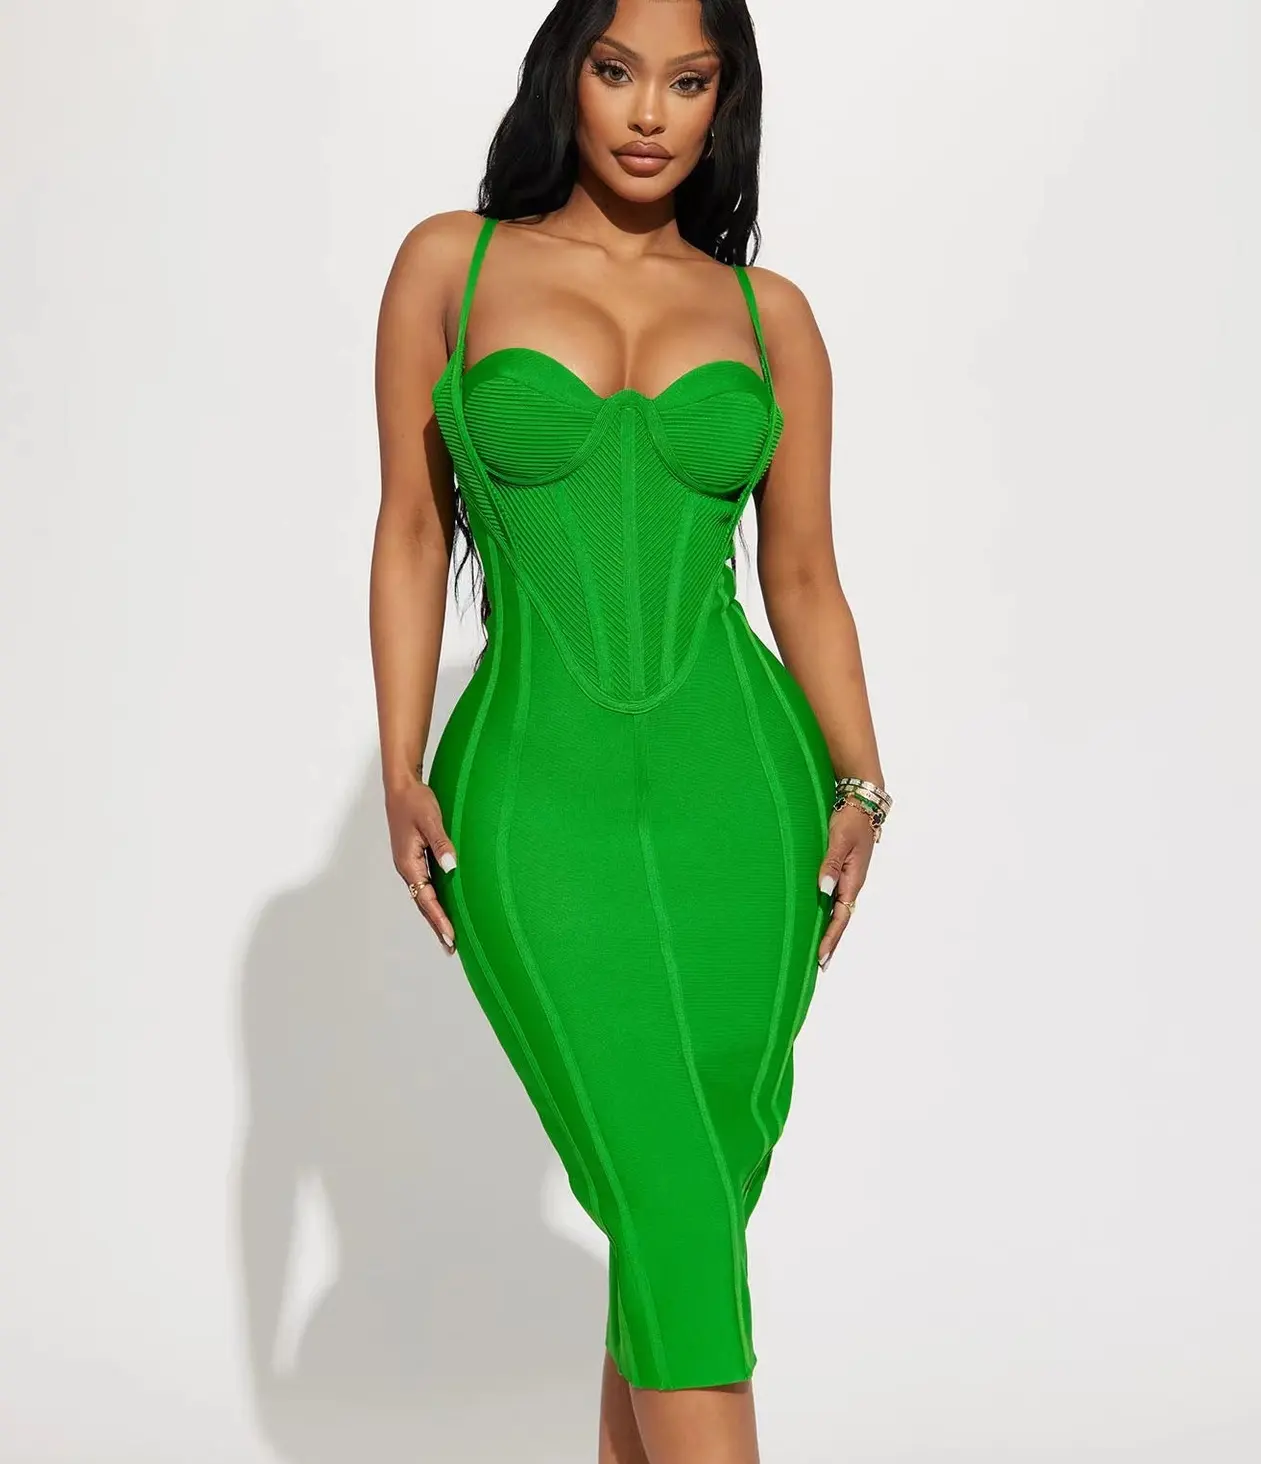 High Quality Knit Green Bandage Formal Evening Gown Dress Elegant Corset Spaghetti Strap Bodycon Knee-length Party Dresses Women